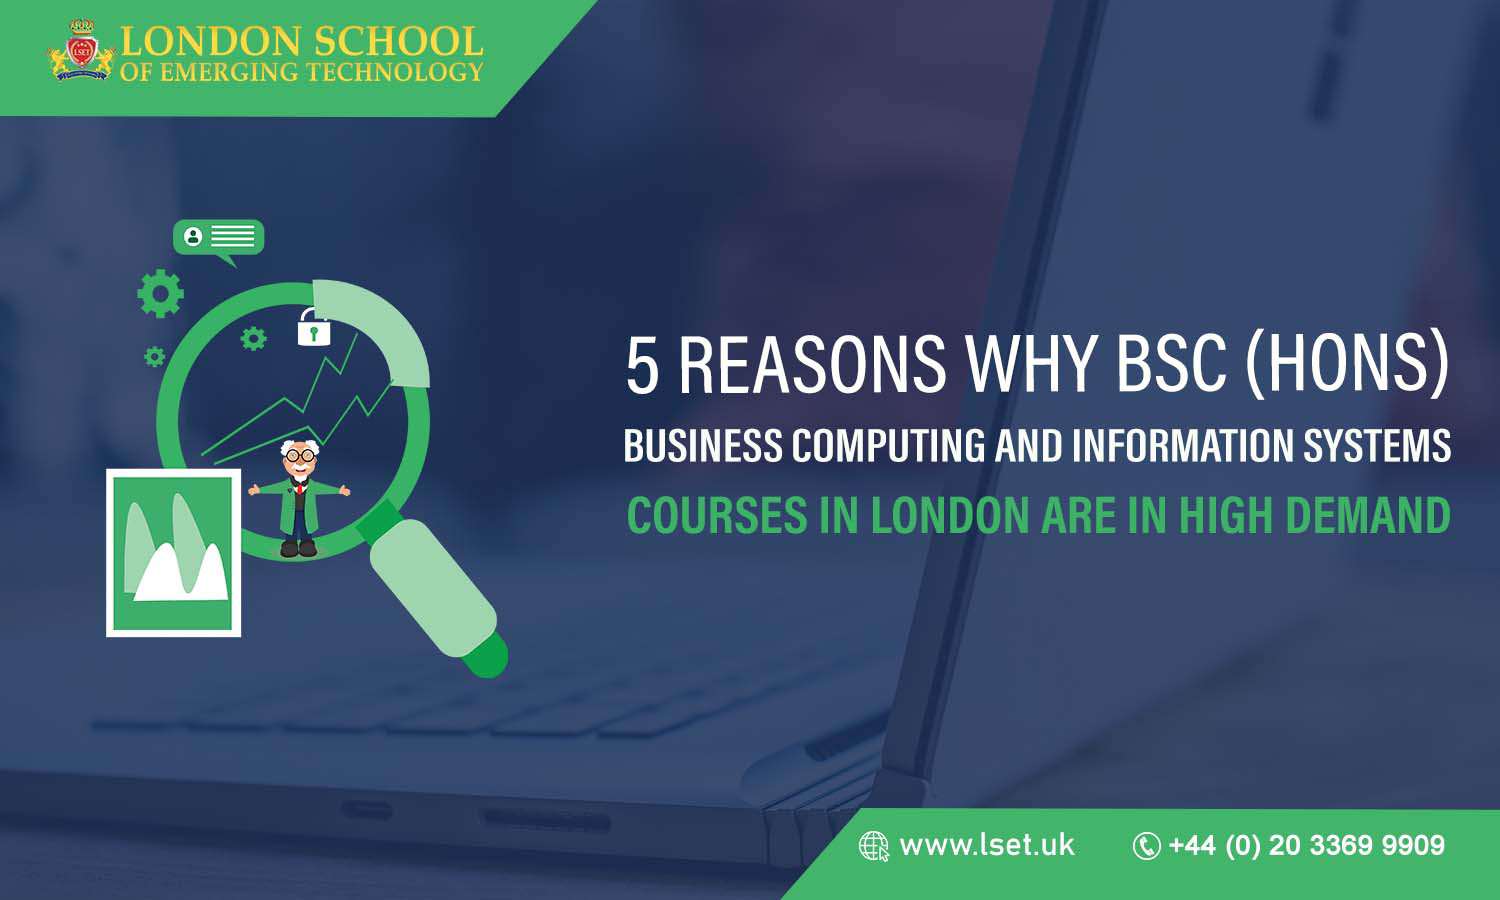 5 Reasons Why BSc (Hons) Business Computing and Information Systems Courses in London are in High Demand